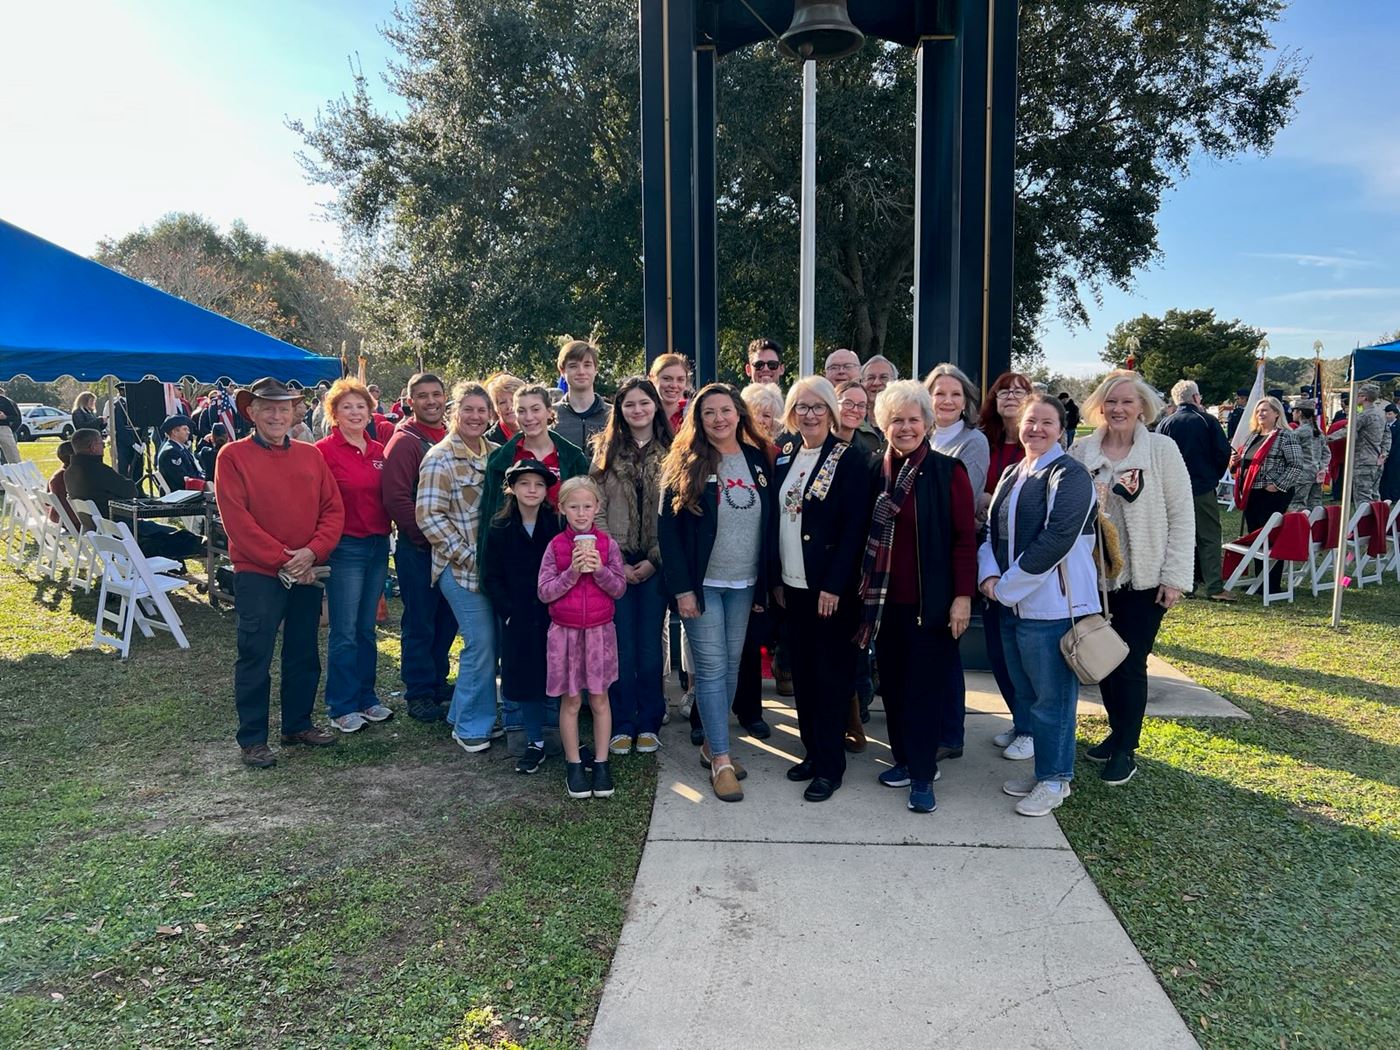 Choctawhatchee Bay Ch had a wonderful and meaningful day honoring our veterans at Beal Memorial Cemetary.  We were joined by the Snowden-Horne Society, N.S.C.A.R., the Emerald Coast SAR and the NWFMOA (Northwest FL Military Officers Association.)